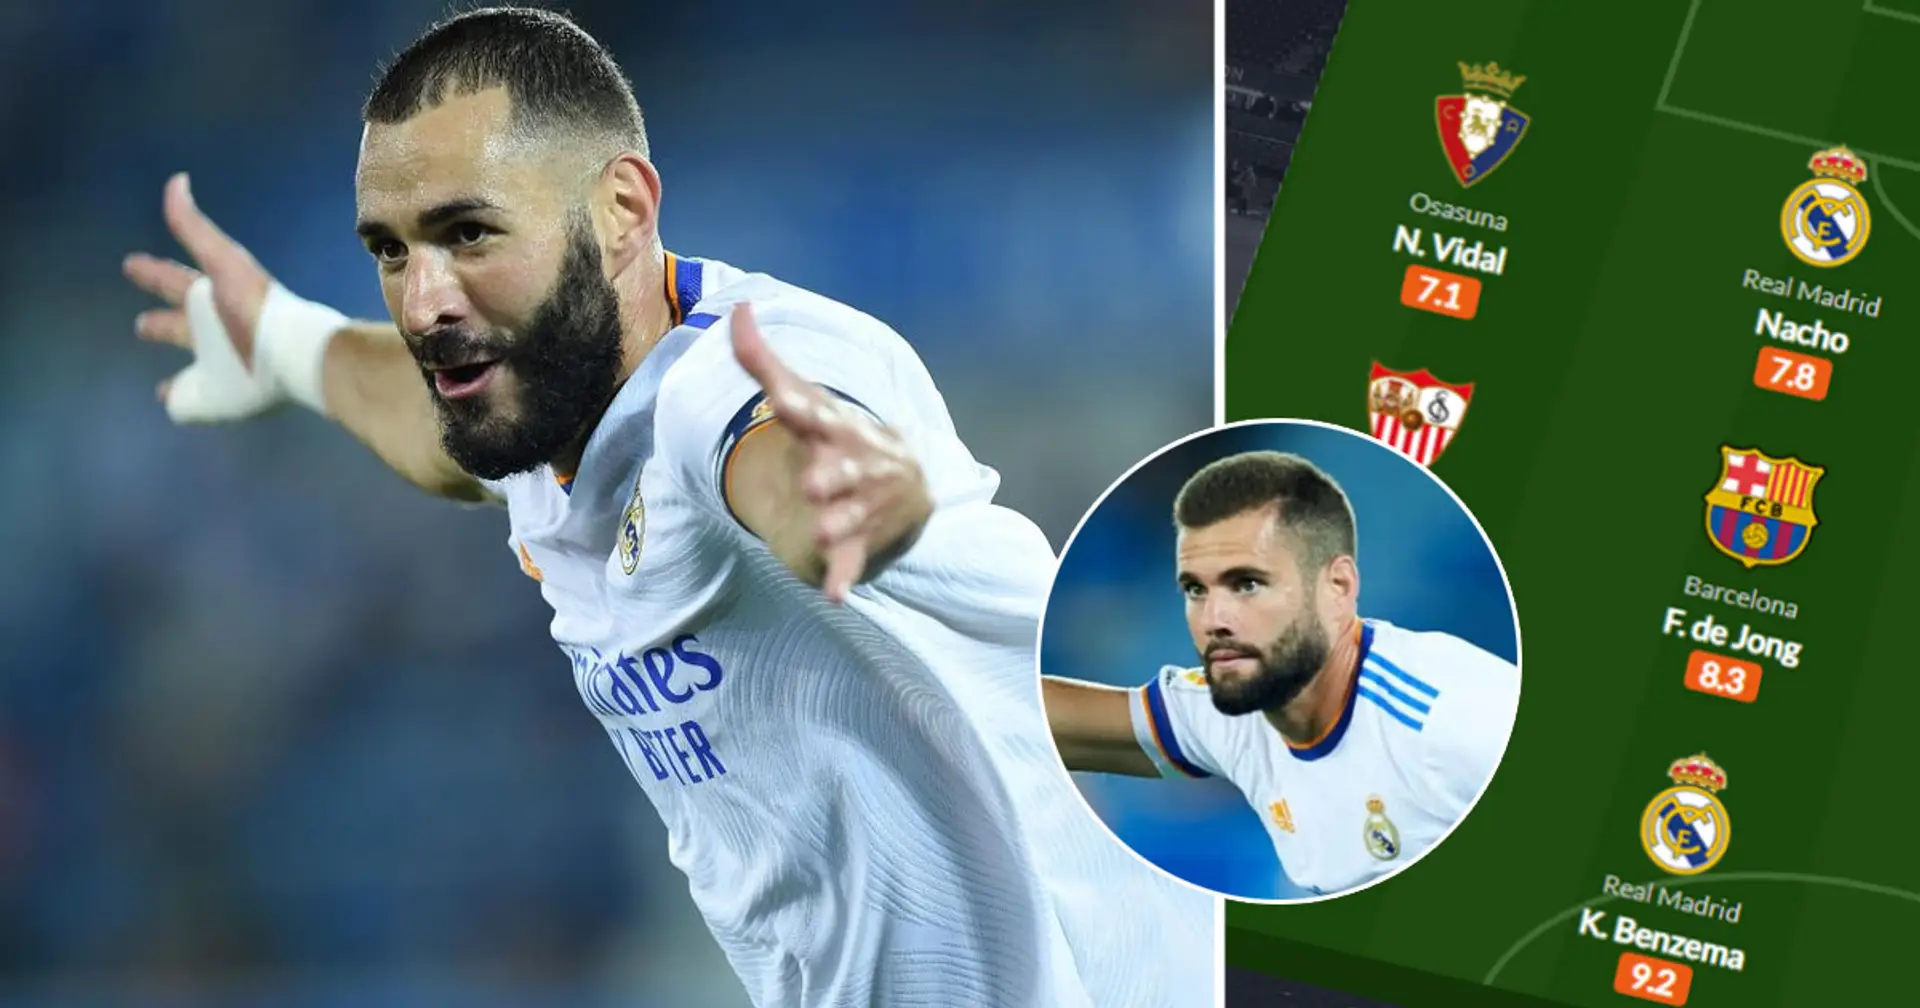 Brace hero Benzema and more: 3 Real Madrid players in WhoScored's team of the week